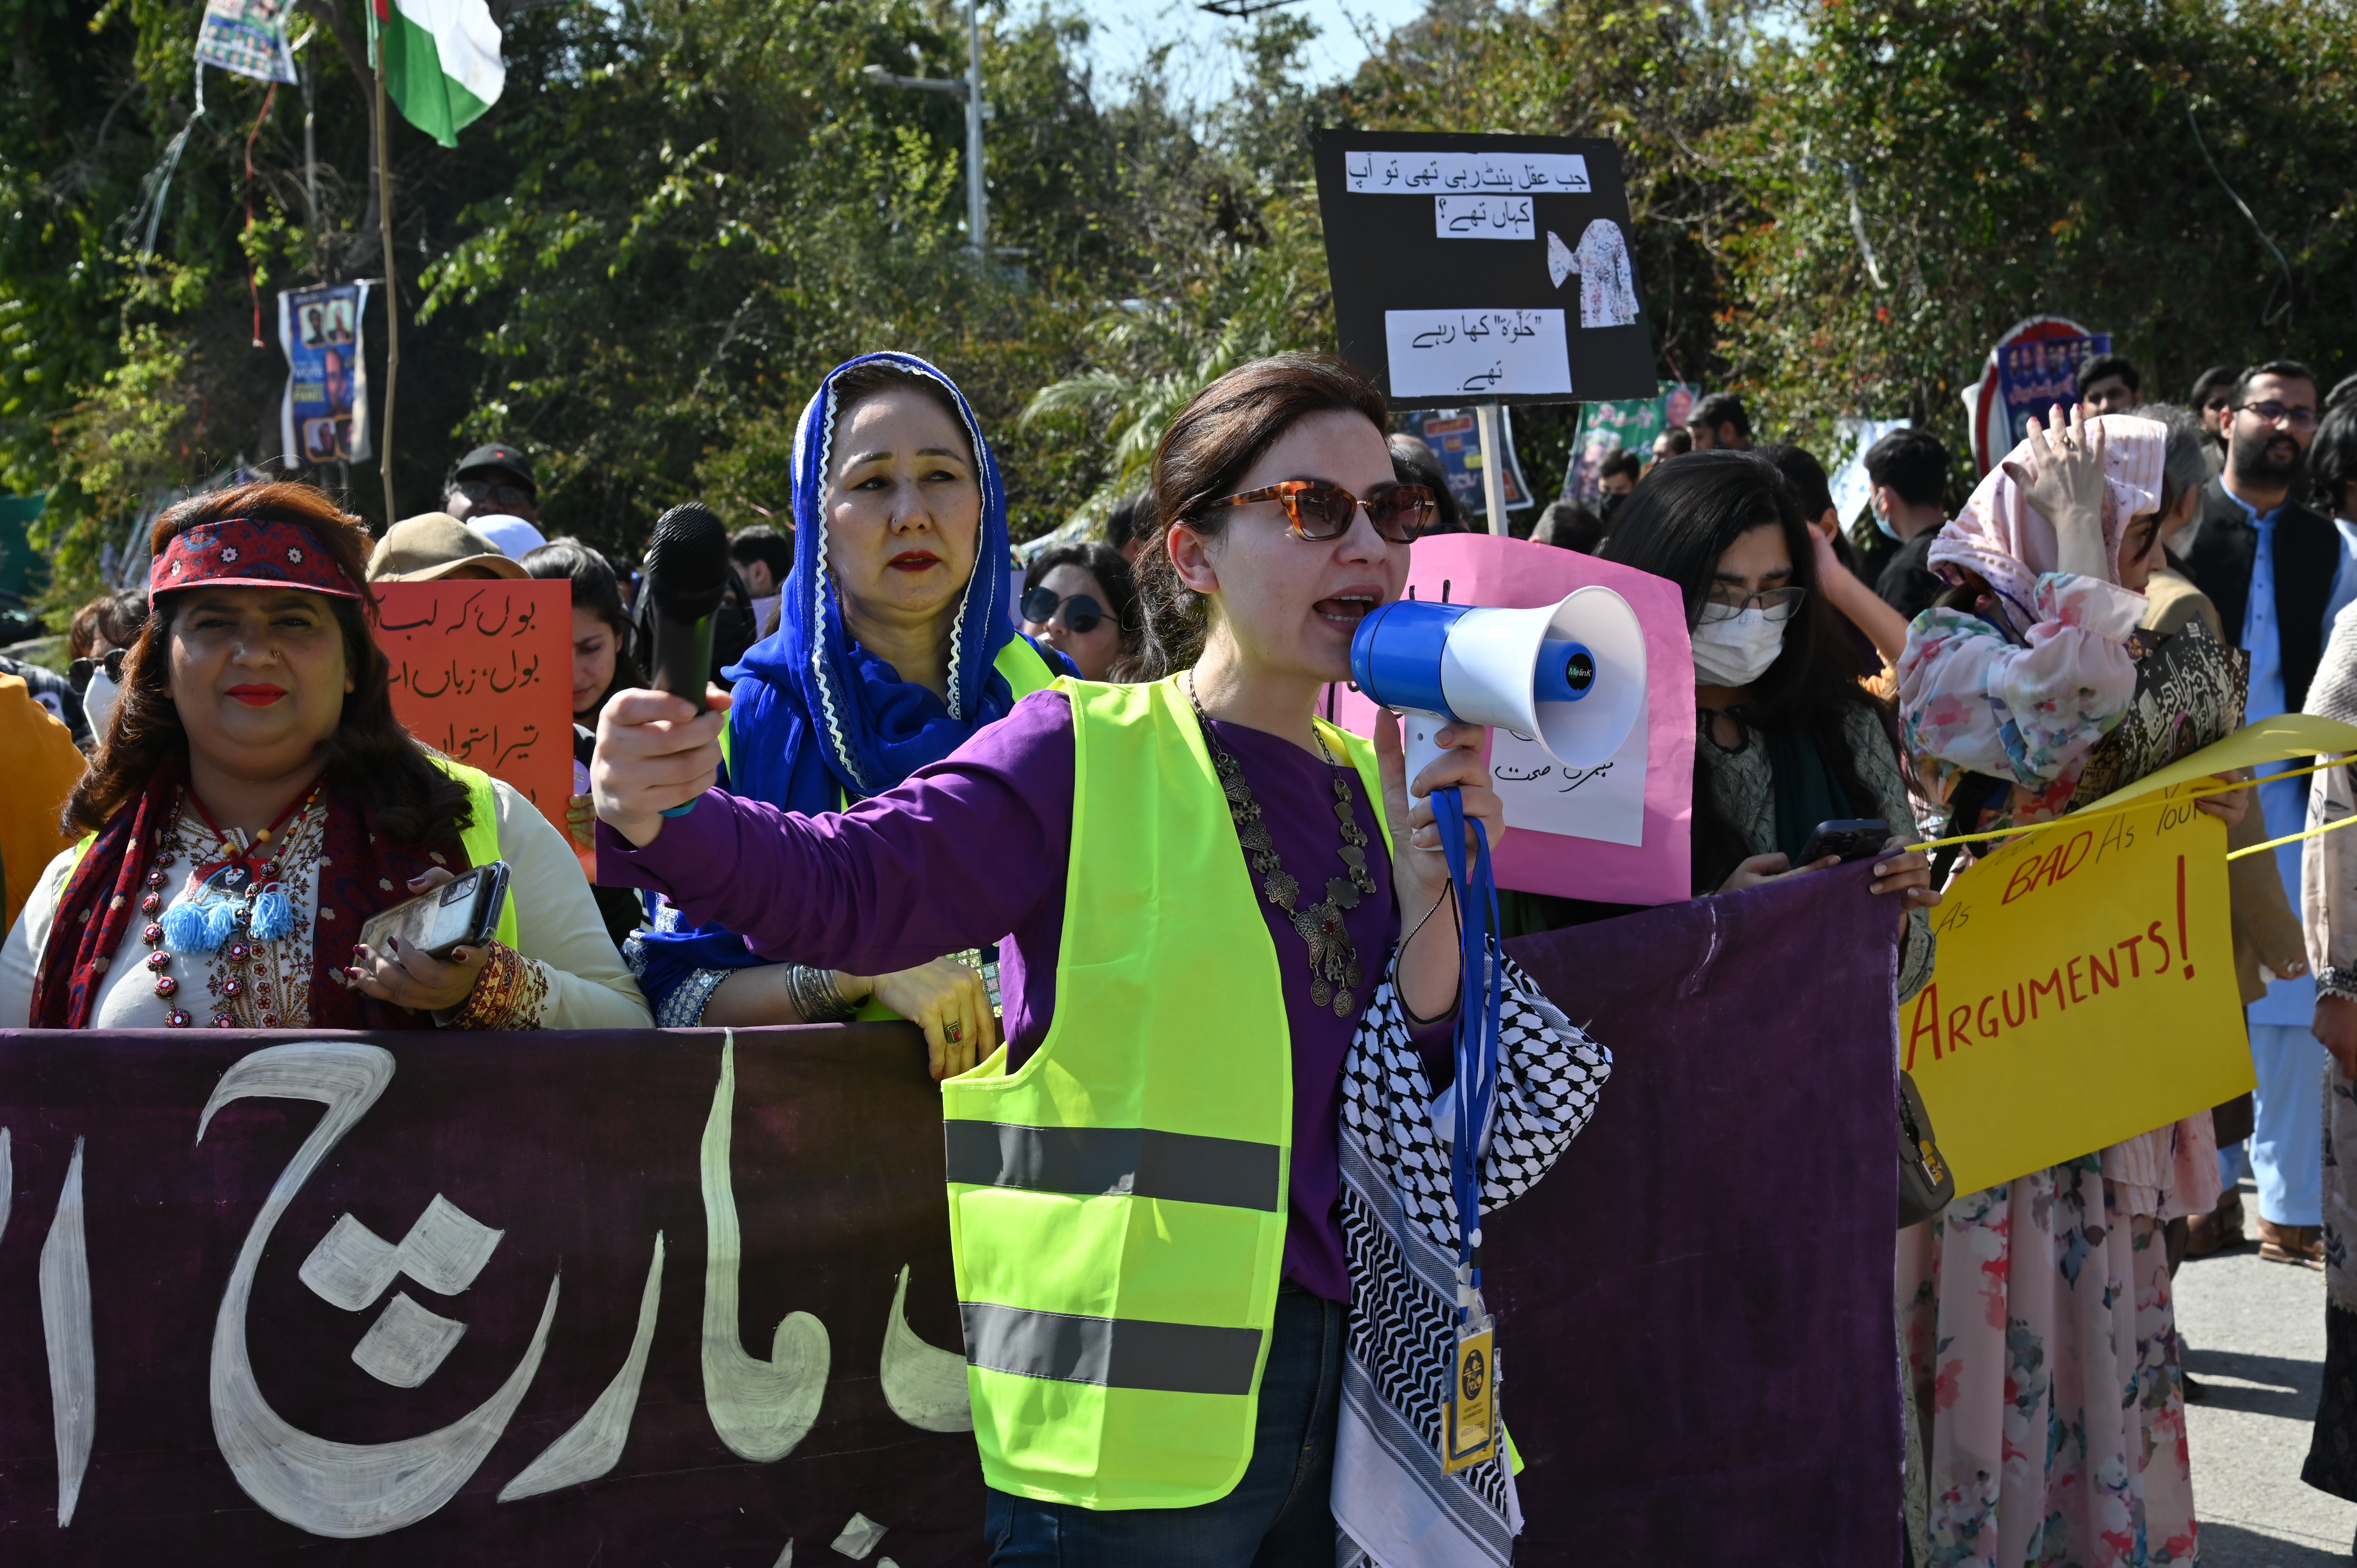 A woman leading The Aurat March